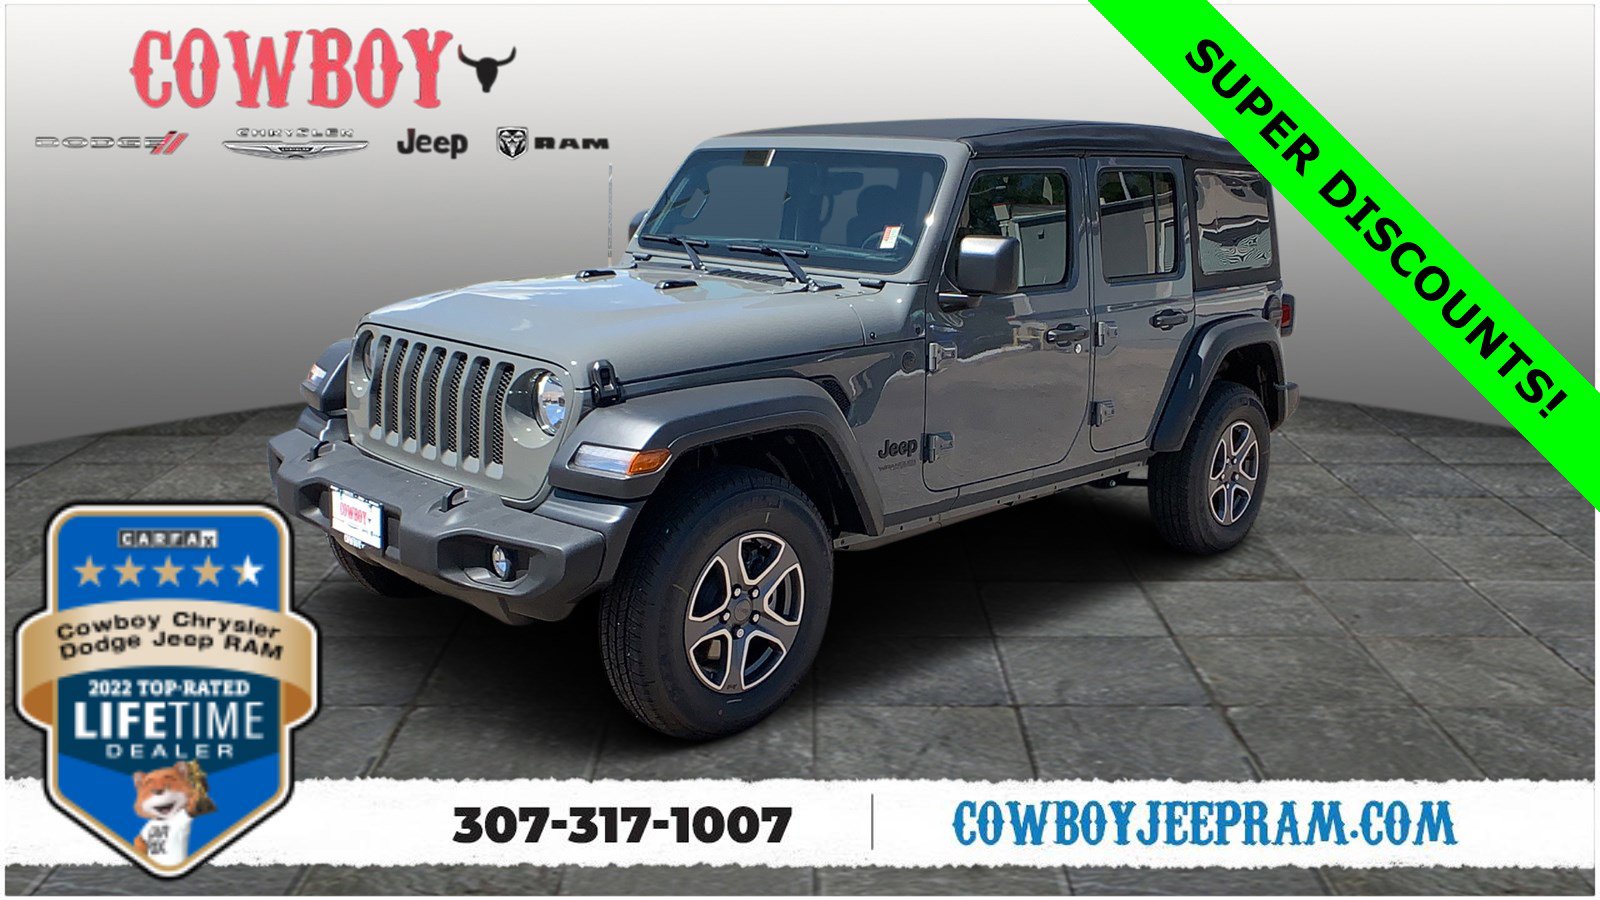 New 2022 Jeep Wrangler UNLIMITED SPORT S 4X4 For Sale In Cheyenne |  VIN:1C4HJXDM6NW273423